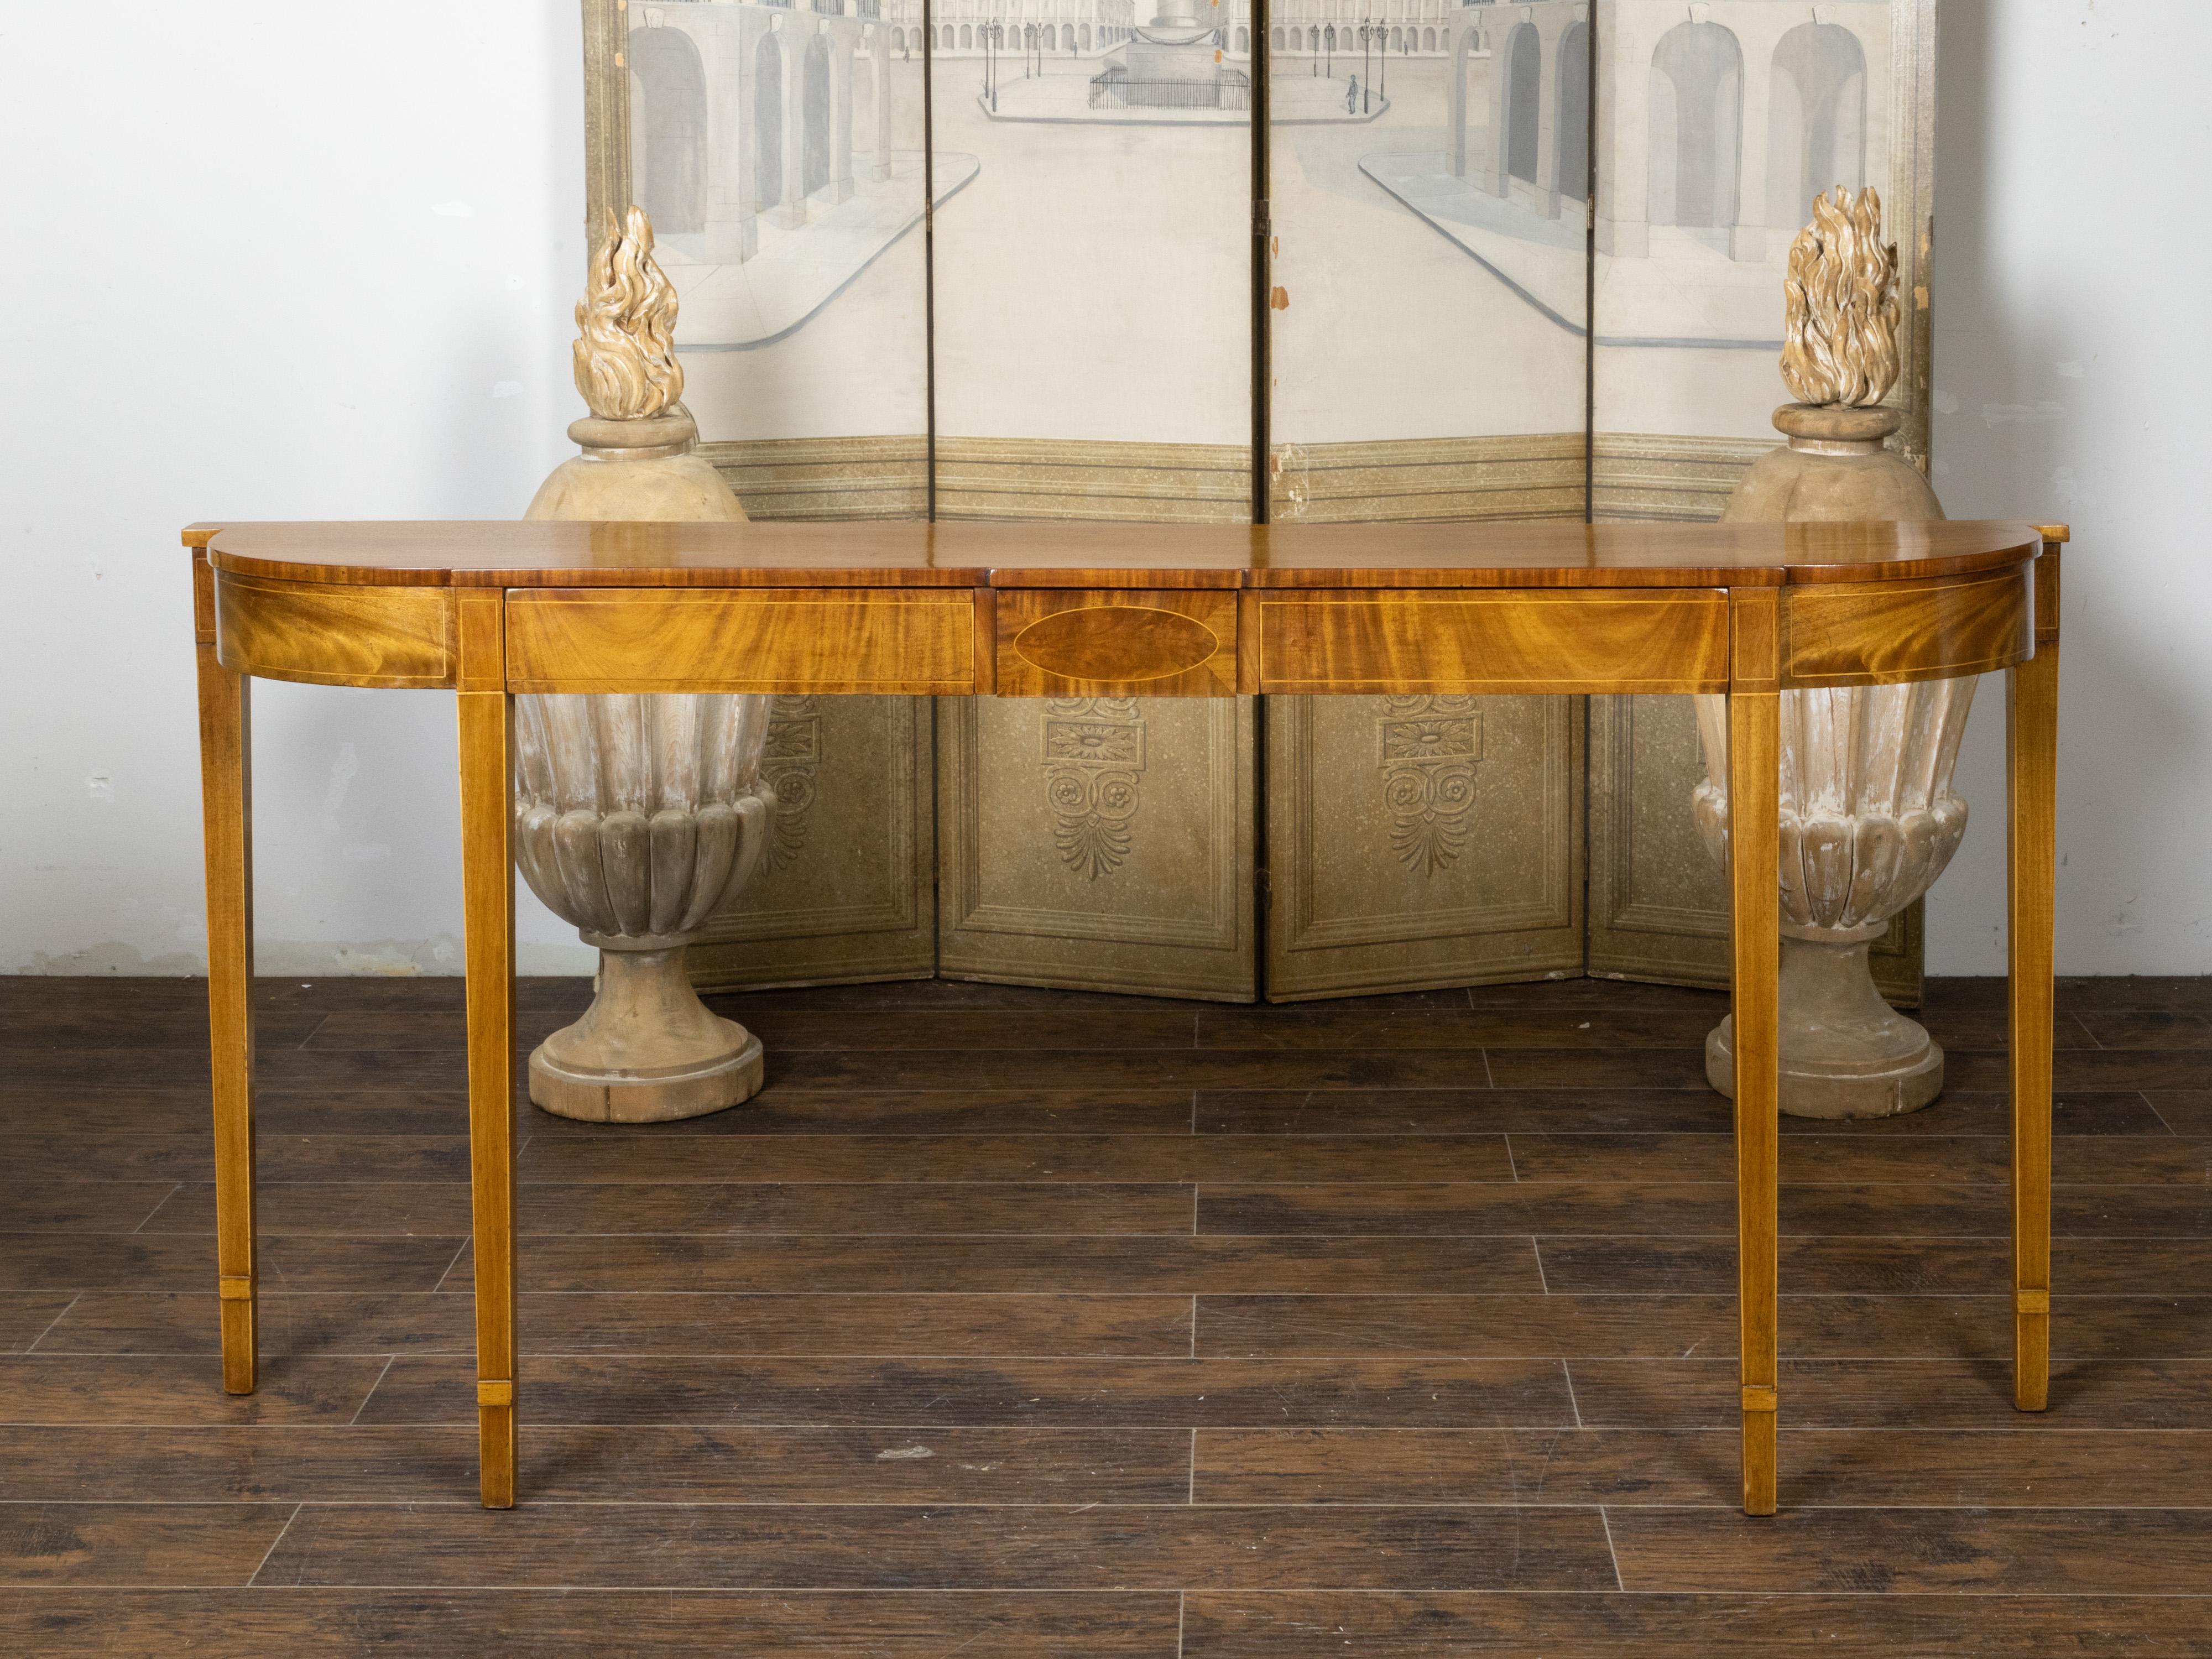 A long English Neoclassical style mahogany bow front console table from the 19th century, with three drawers, banding and tapered legs. Created in England during the 19th century, this Neoclassical style mahogany console table features a shaped top